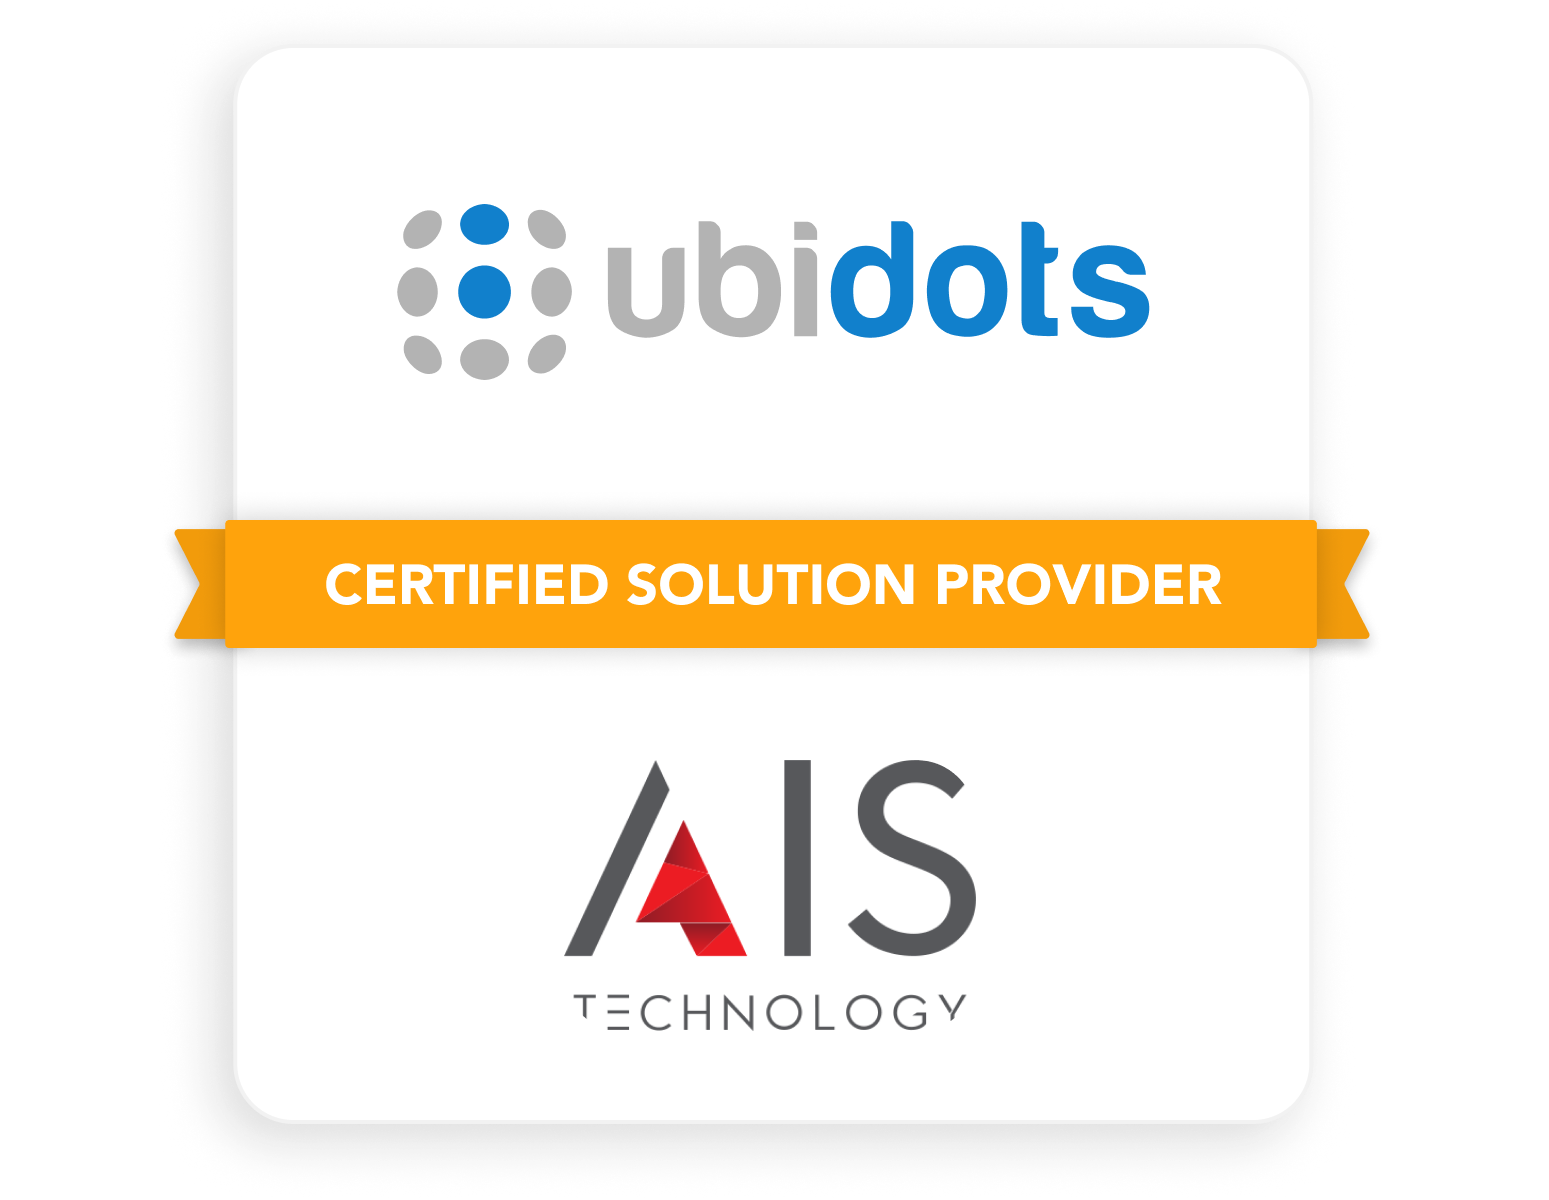 AIS Technology: An IoT Solution to Cut Energy Costs and Automate Billing Using Ubidots